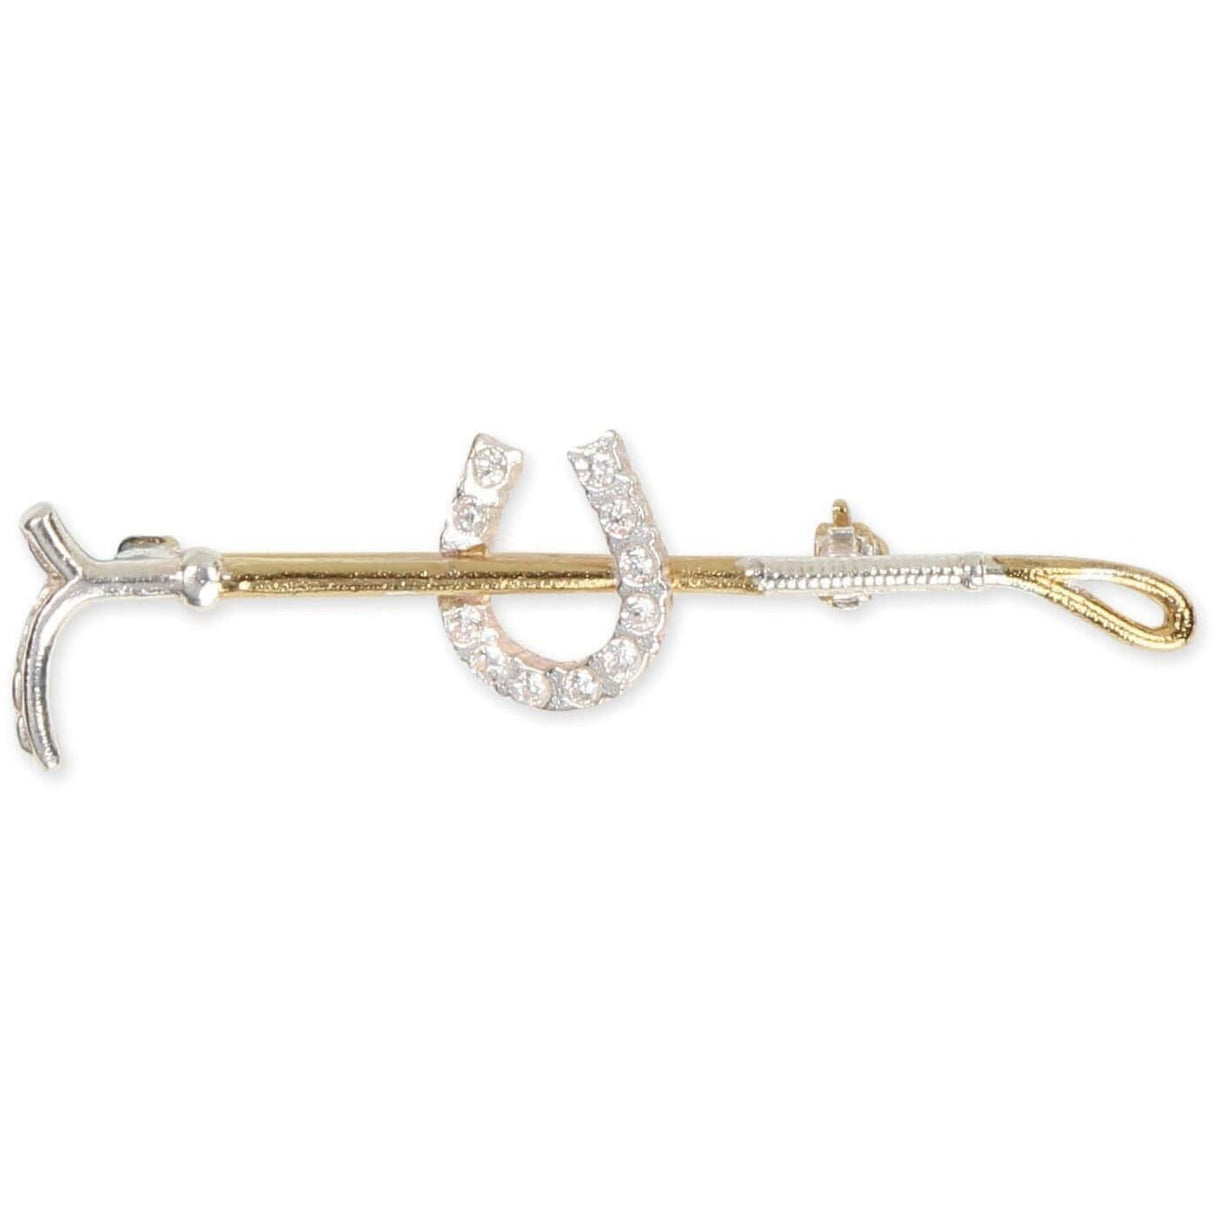 Shires Gold Crop with Small Diamante Horse Shoe